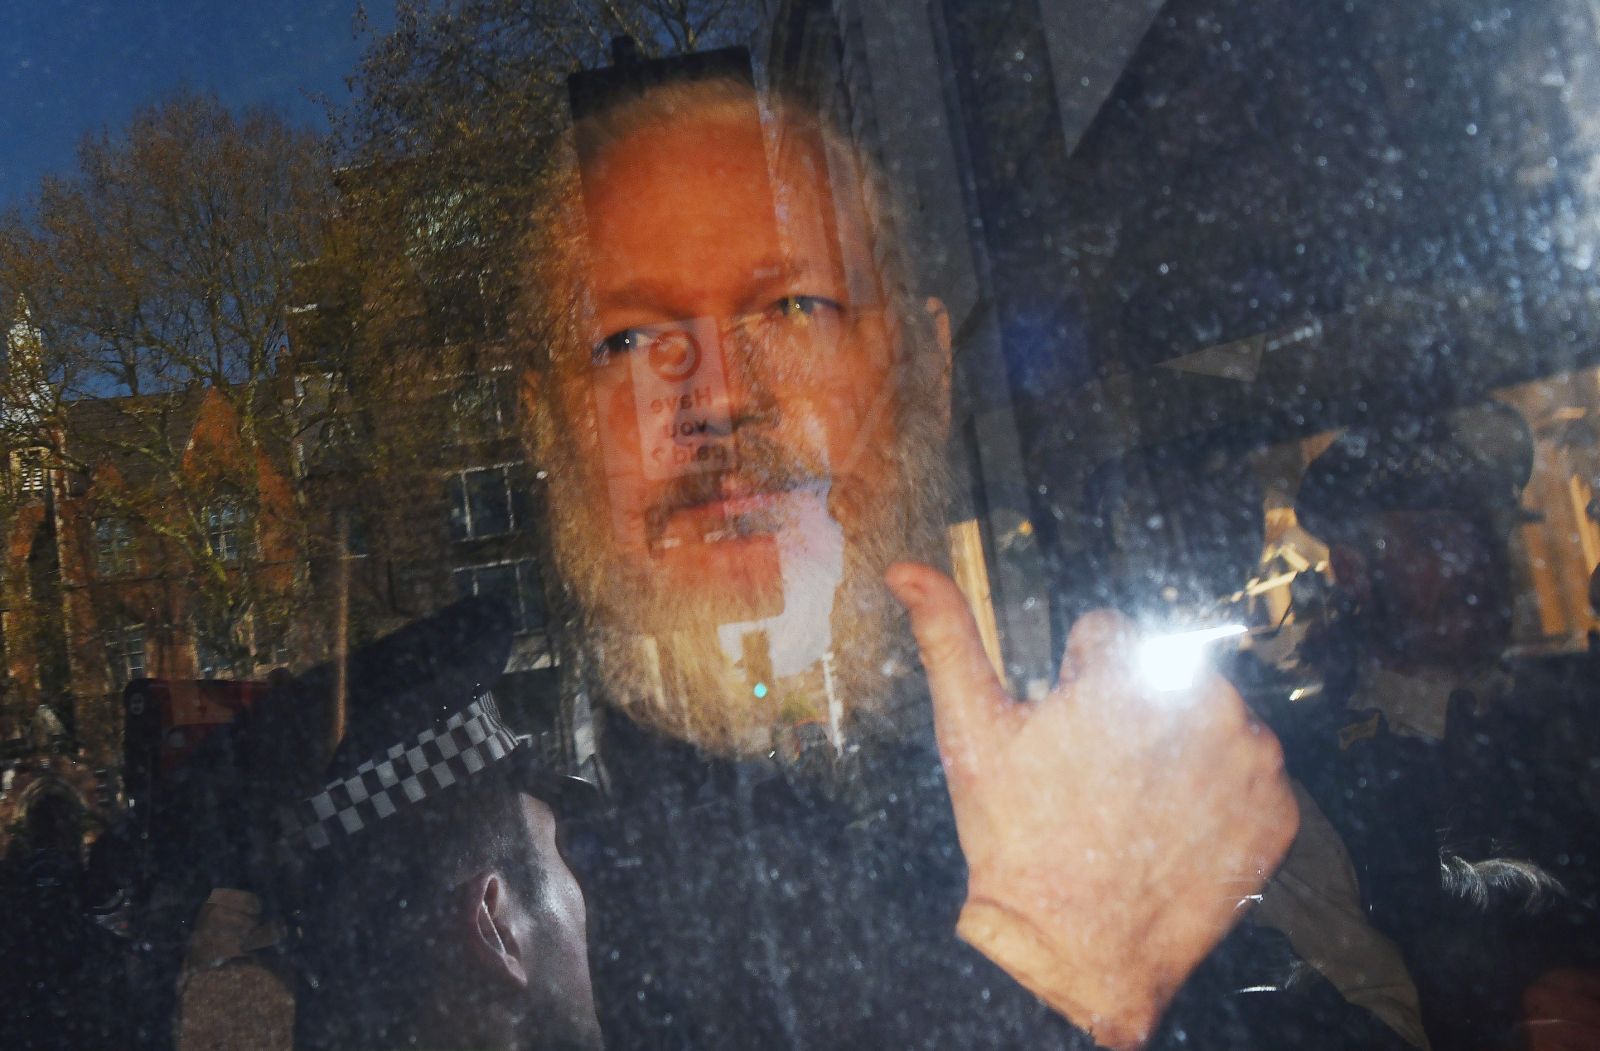 epa08916193 (FILE) - WikiLeaks co-founder Julian Assange arrives at Westminster Magistrates Court in London, Britain, 11 April 2019 (reissued 03 January 2021). London's Old Bailey courthouse will deliver the decision on 04 January 2021, if Julian Assange can be extradited from Britain to the US to face espionage charges over the publication of secret US military documents.  EPA/STRINGER